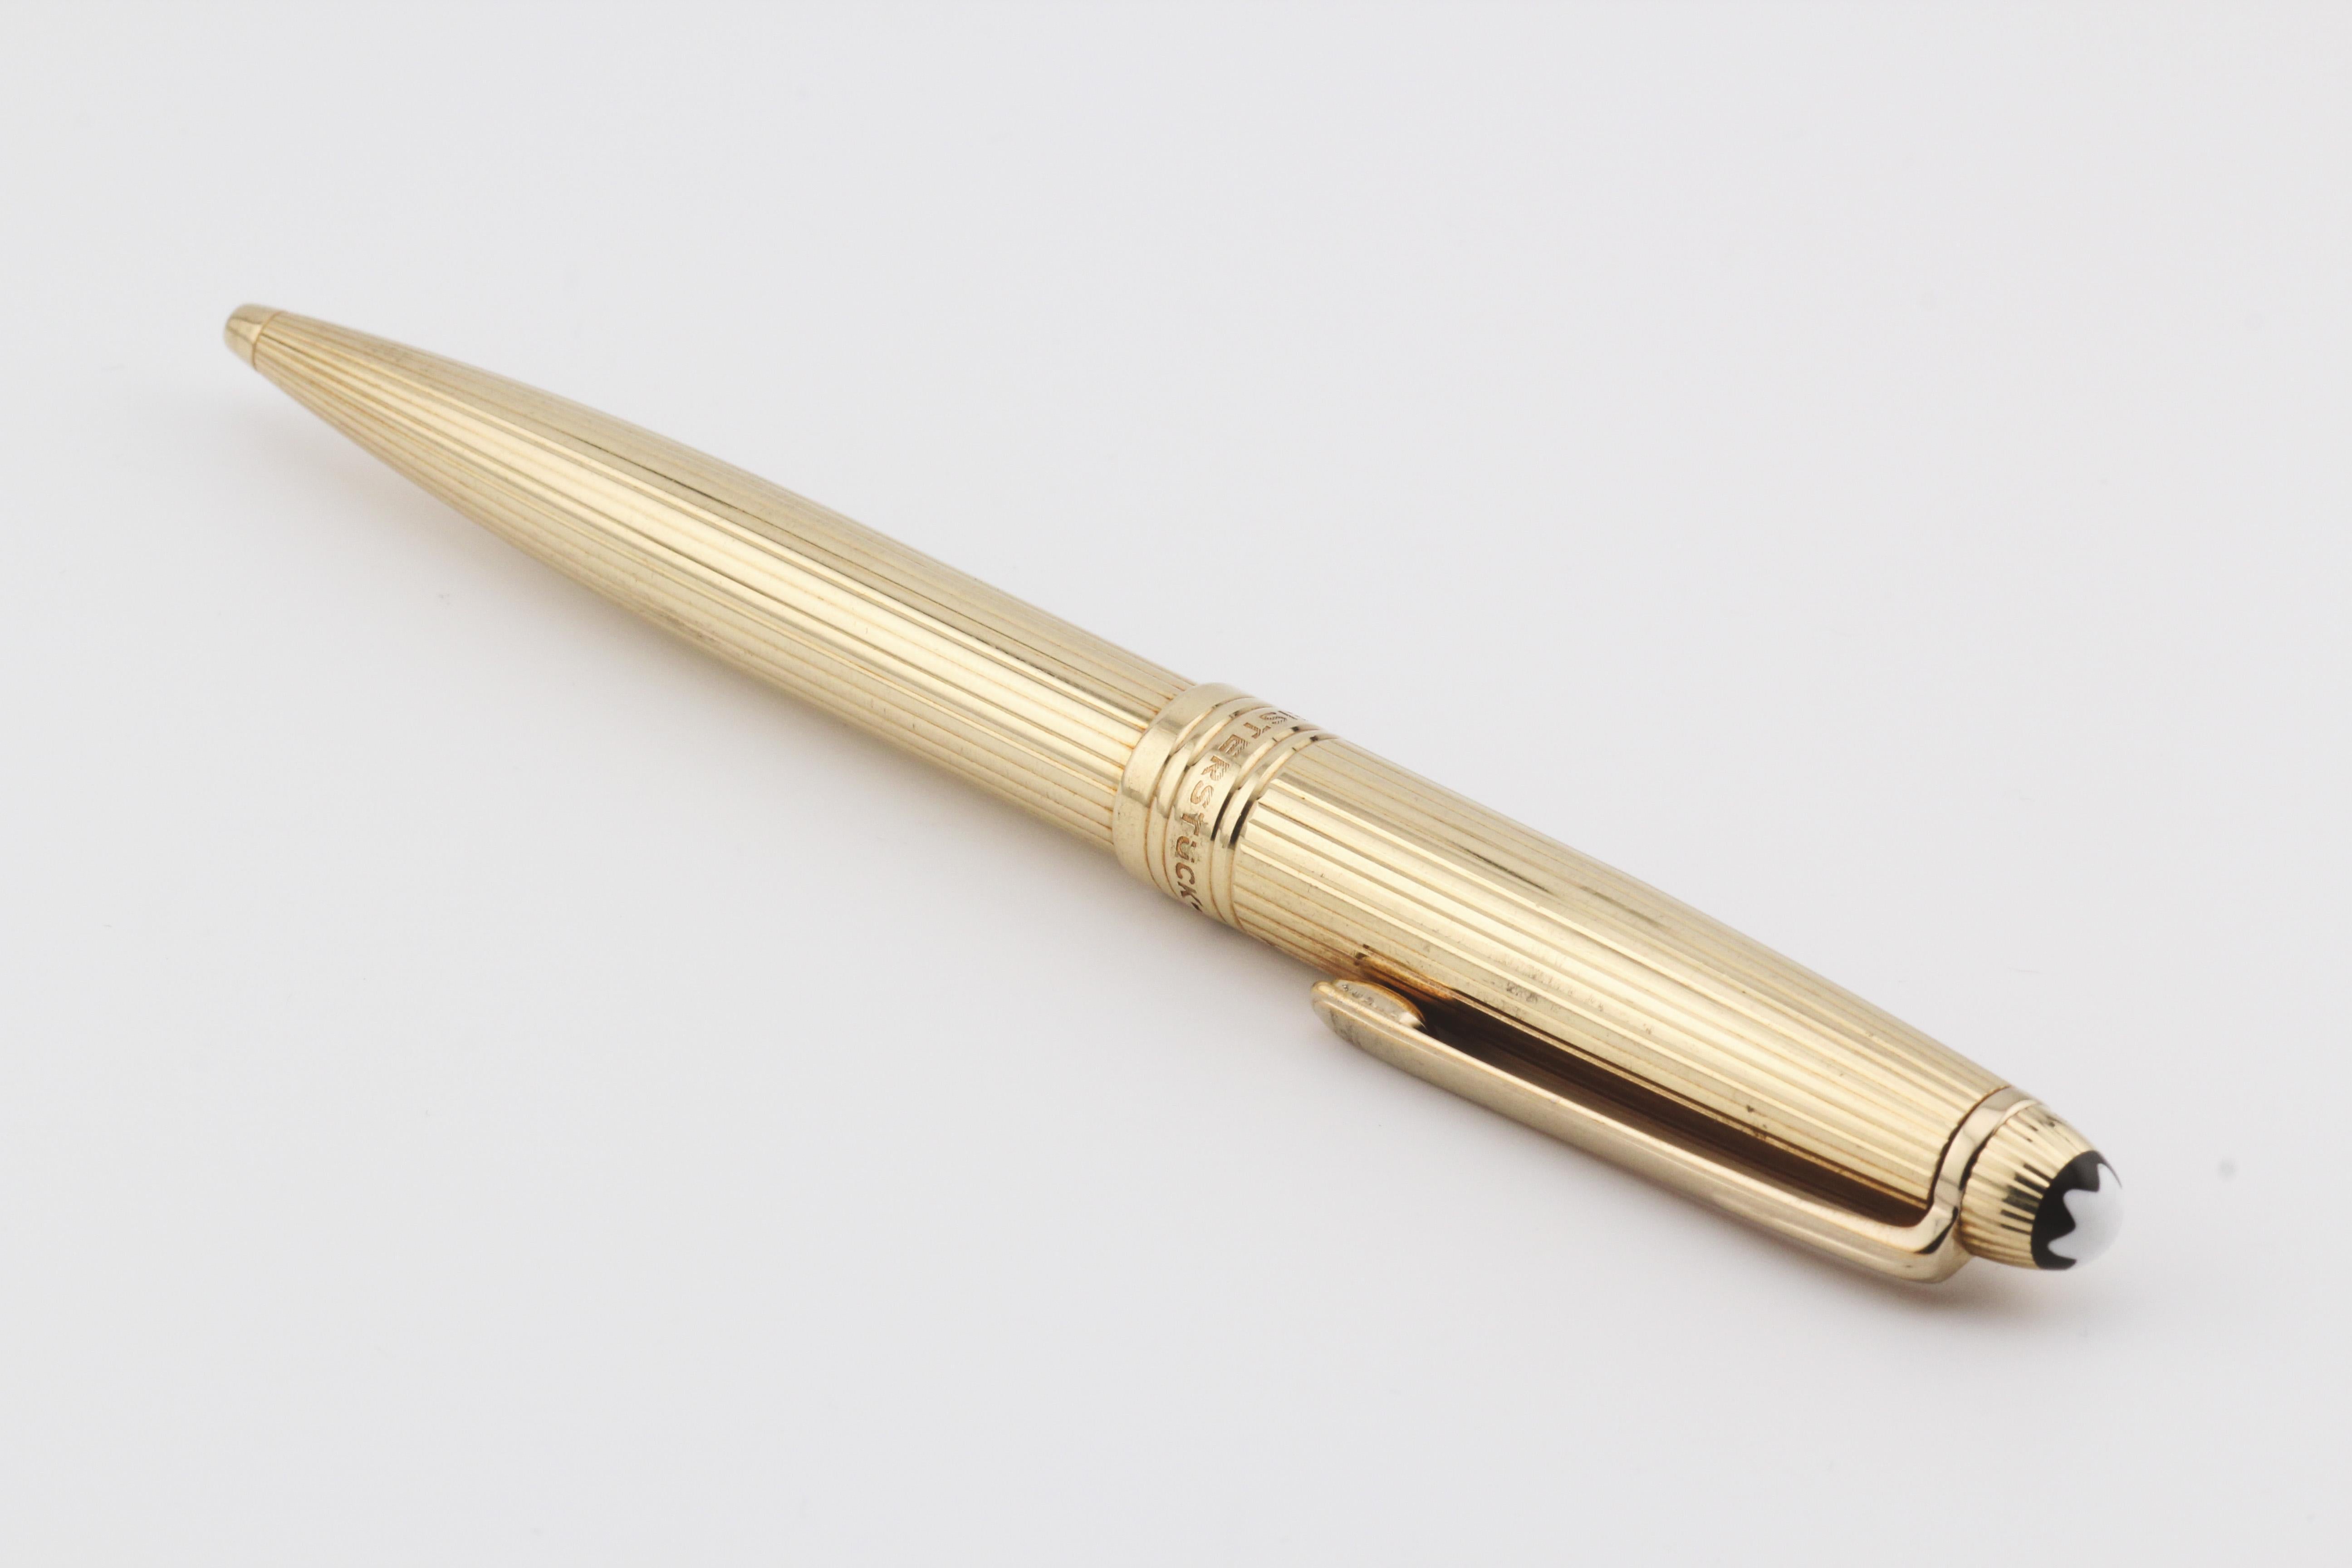 The Montblanc MEISTERSTÜCK 18K Yellow Gold Ballpoint Pen epitomizes the pinnacle of luxury writing instruments. Crafted by Montblanc, a prestigious name synonymous with fine craftsmanship and timeless elegance, this ballpoint pen exudes